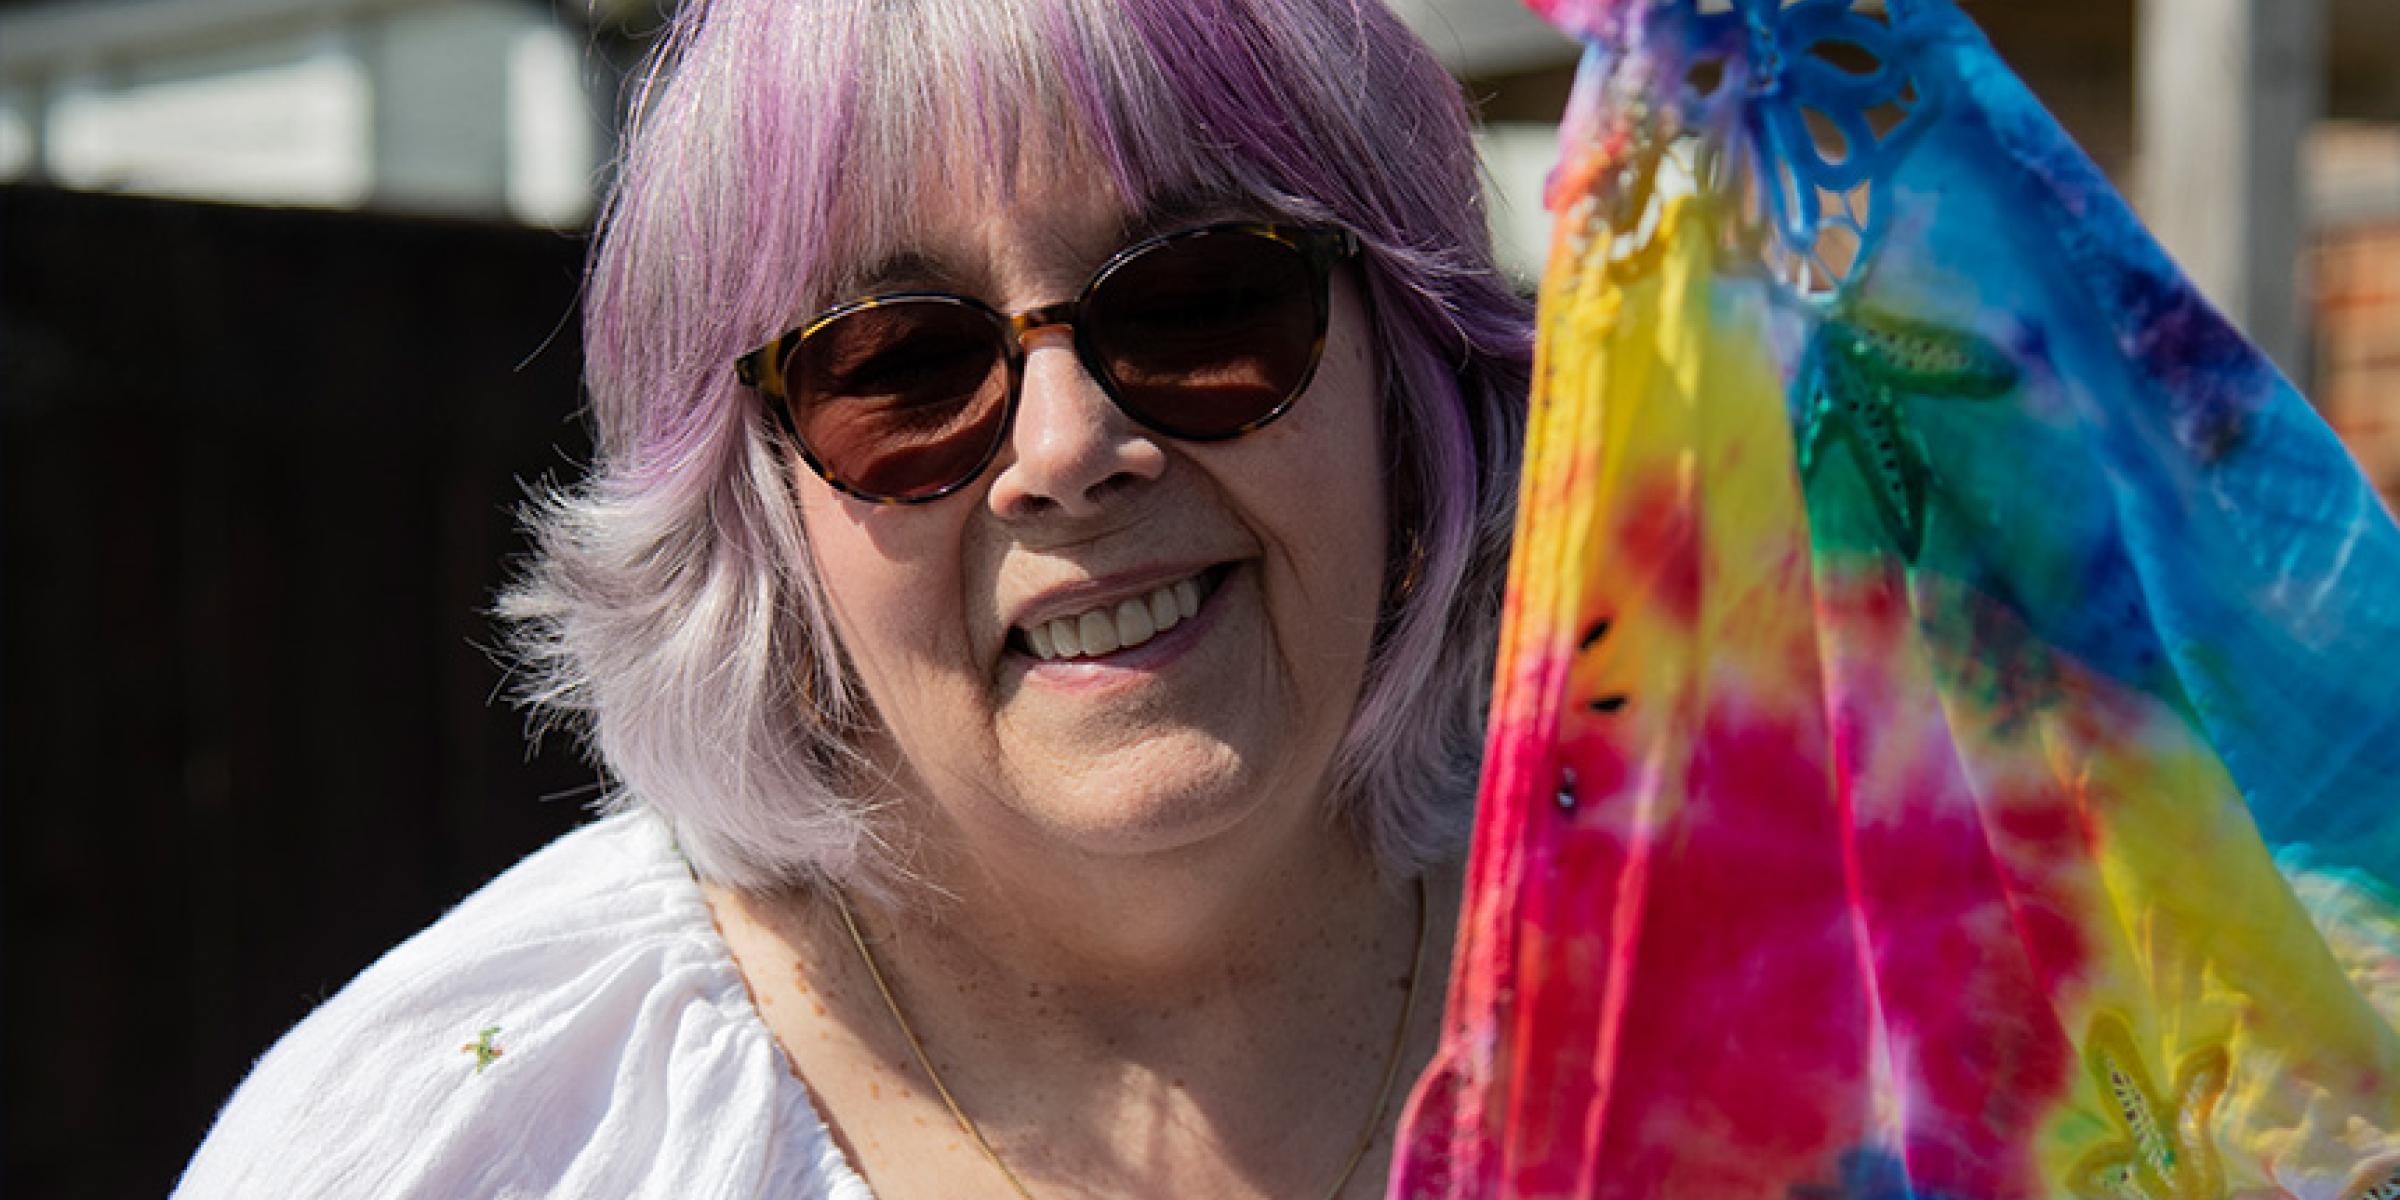 Gill Taylor stands outdoors next to some colourful tie-dyed fabric. She is wearing sunglasses and smiling.